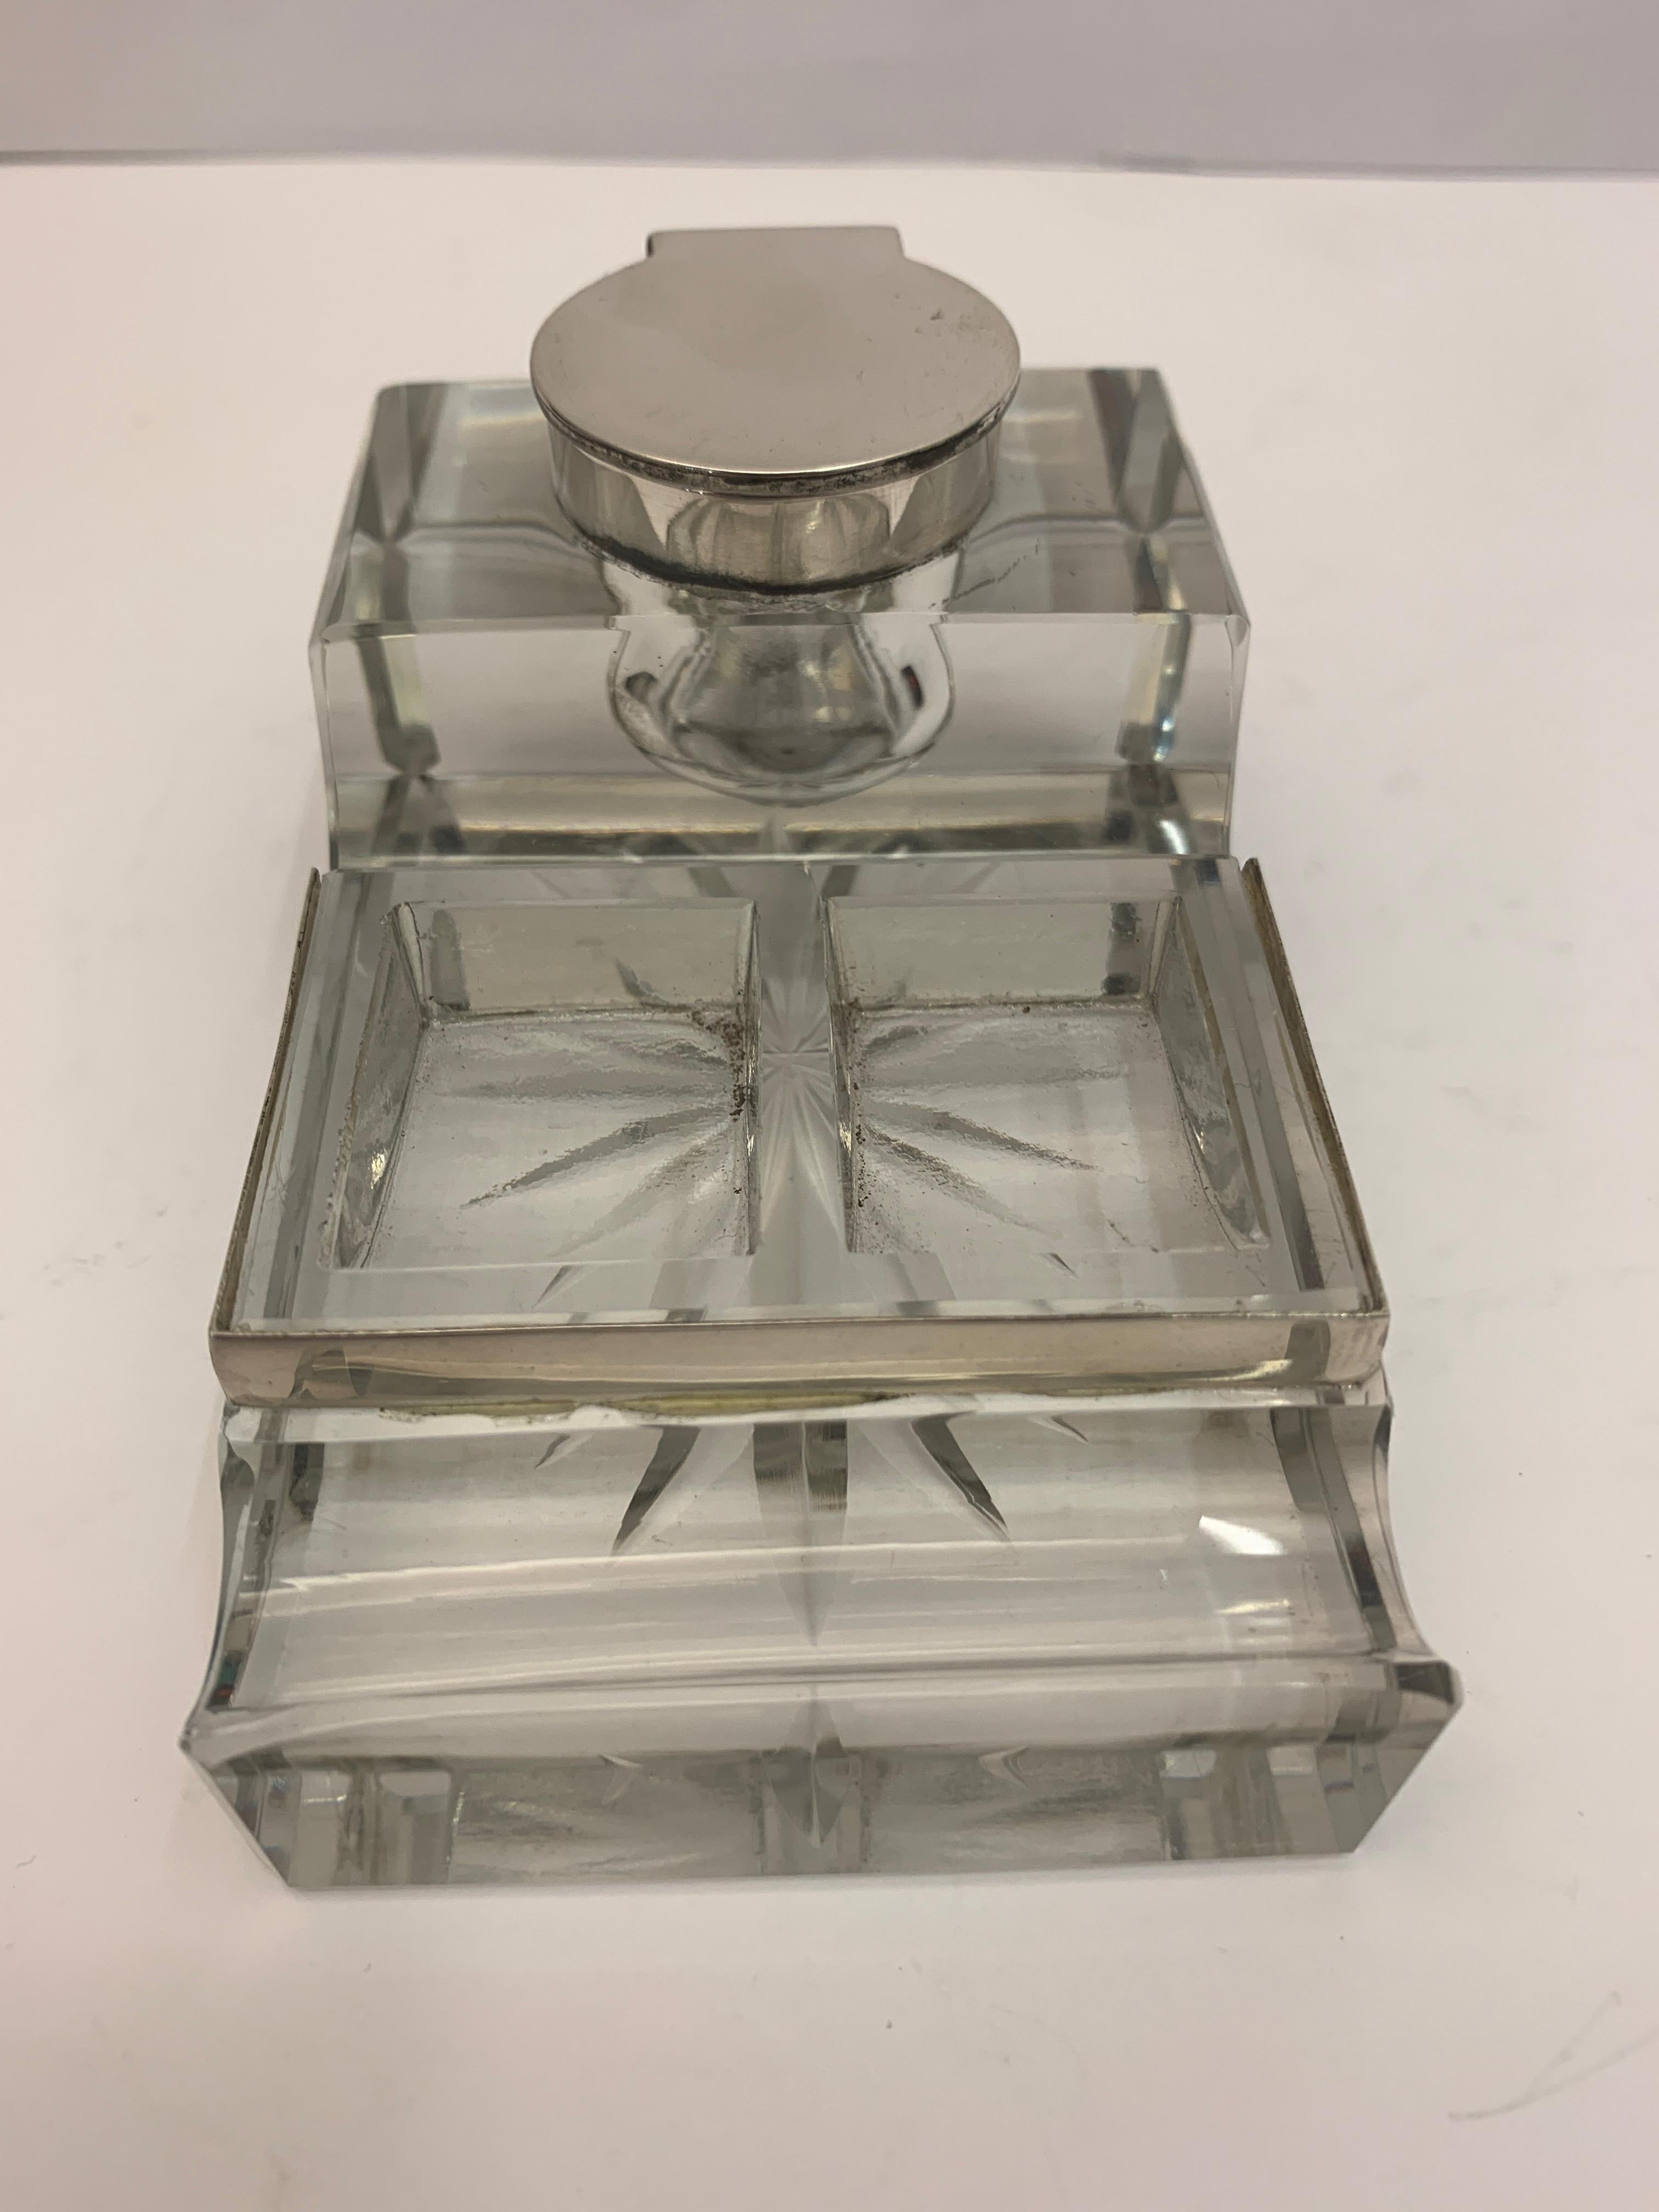 Glass and silver desk/inkwell with separate stamp holder section.